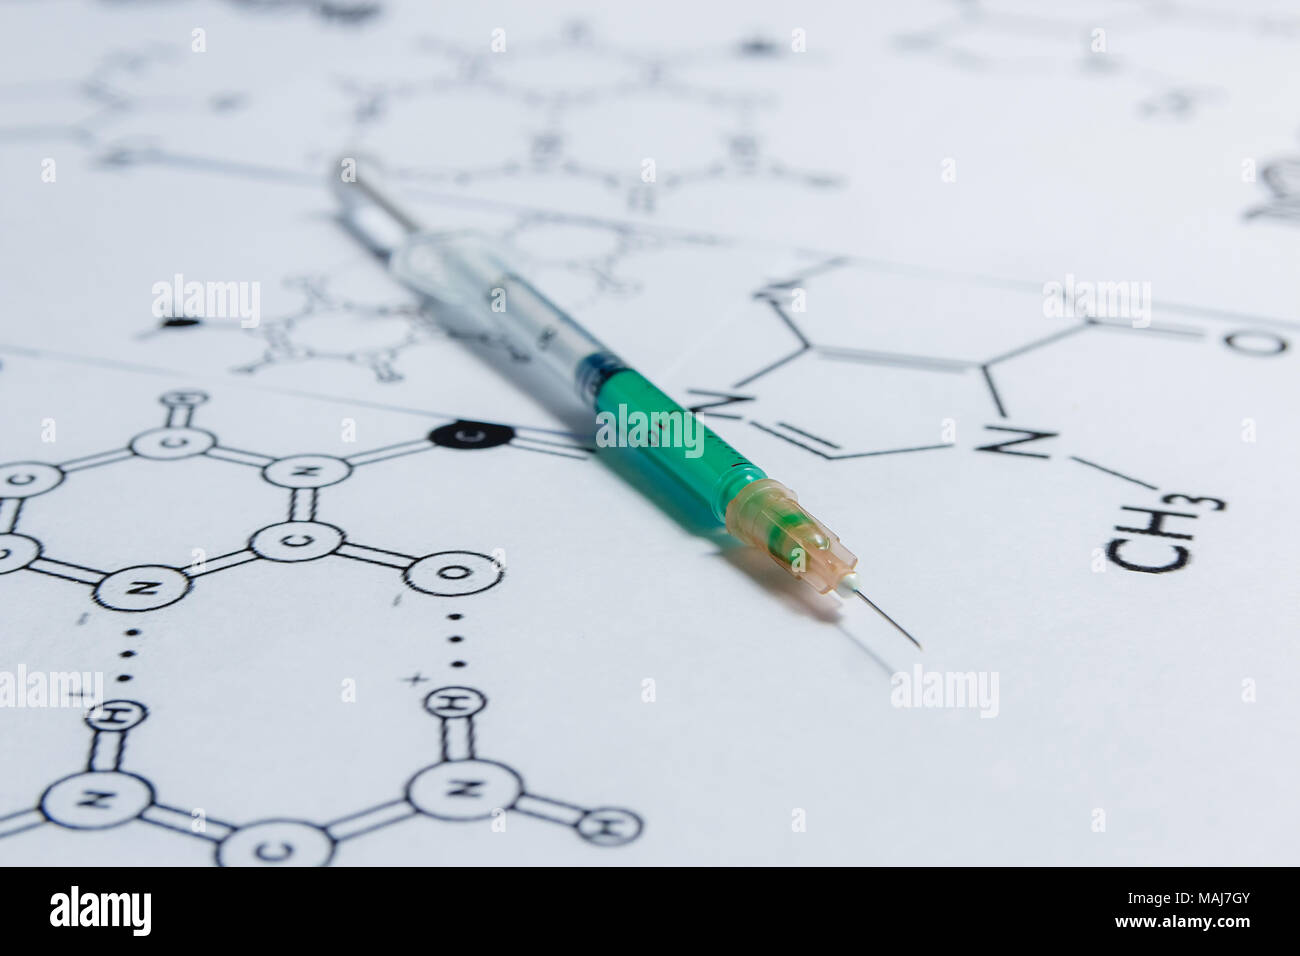 Concept of Non-natural Products, Gmo. Syringe on White Background with Chemical Formula, Stock Photo